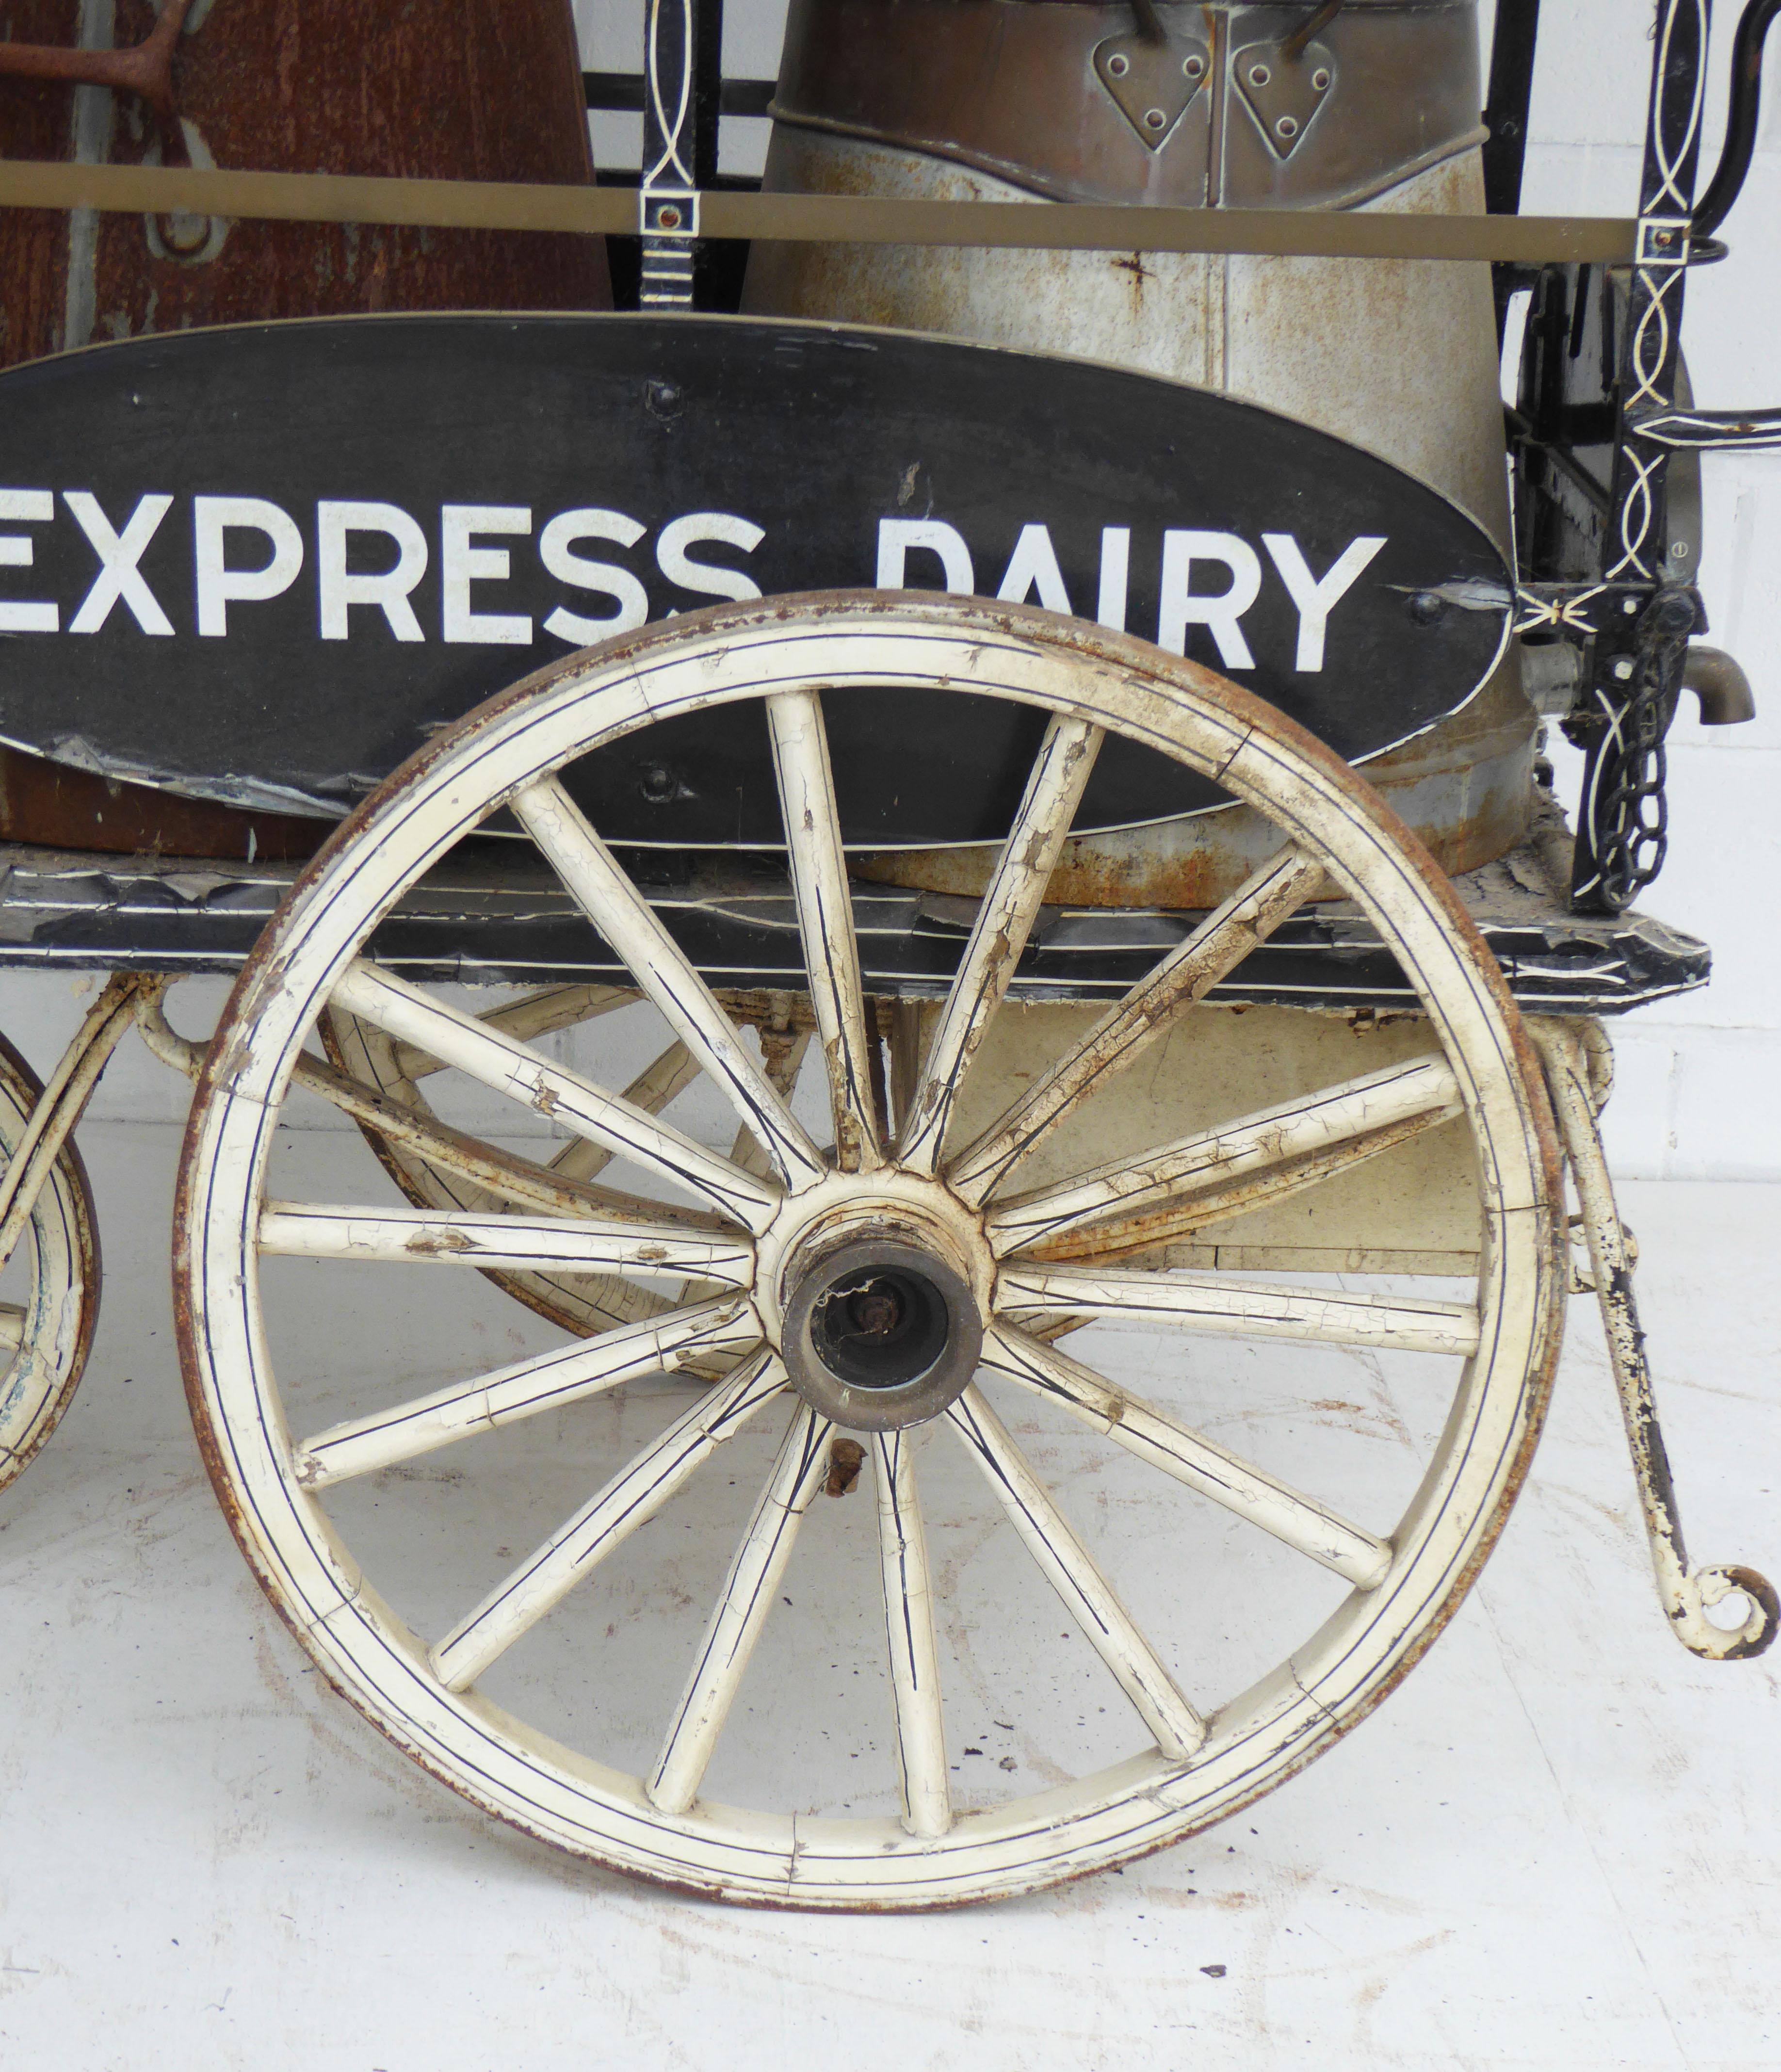 For sale is an unusual Edwardian hand pulled milk cart. The milk cart has two large churns, on of which with a badge stating 